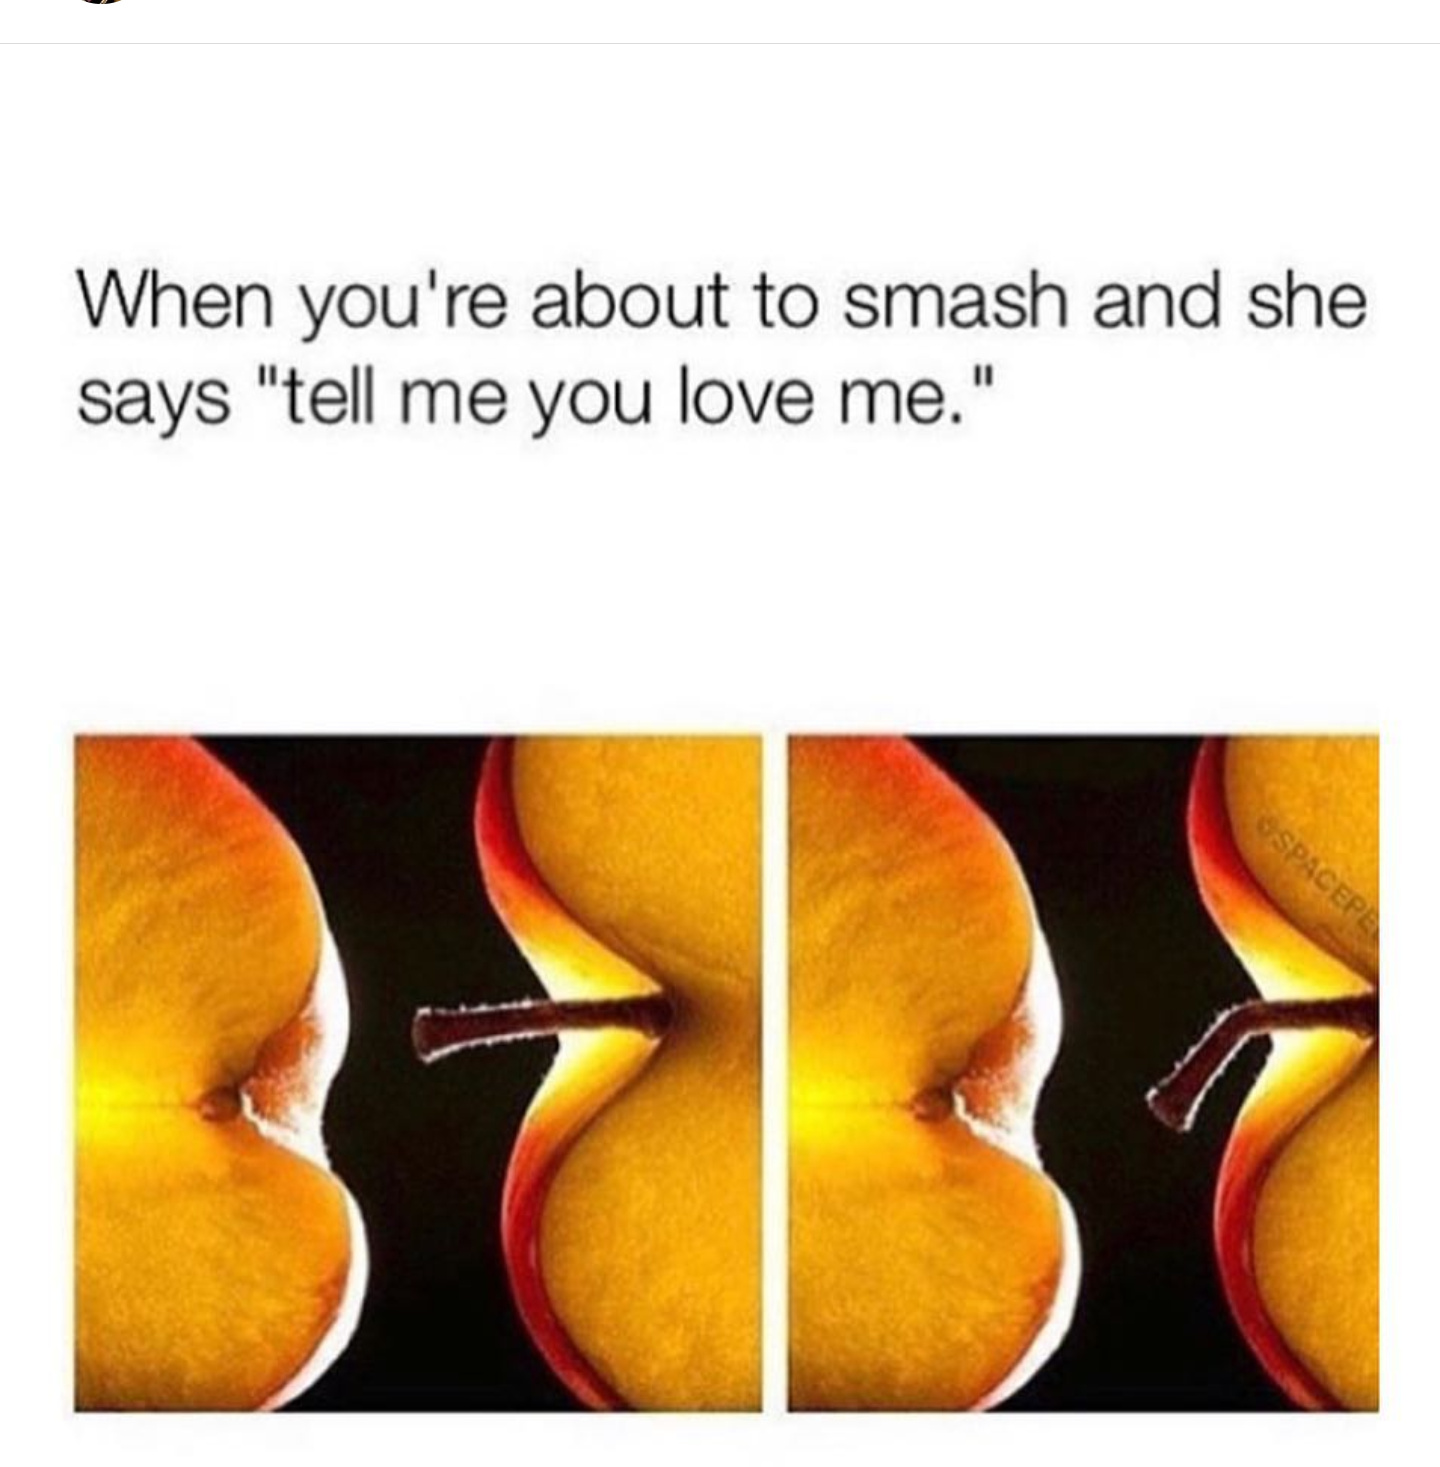 peach sex meme - When you're about to smash and she says "tell me you love me." Spacepe